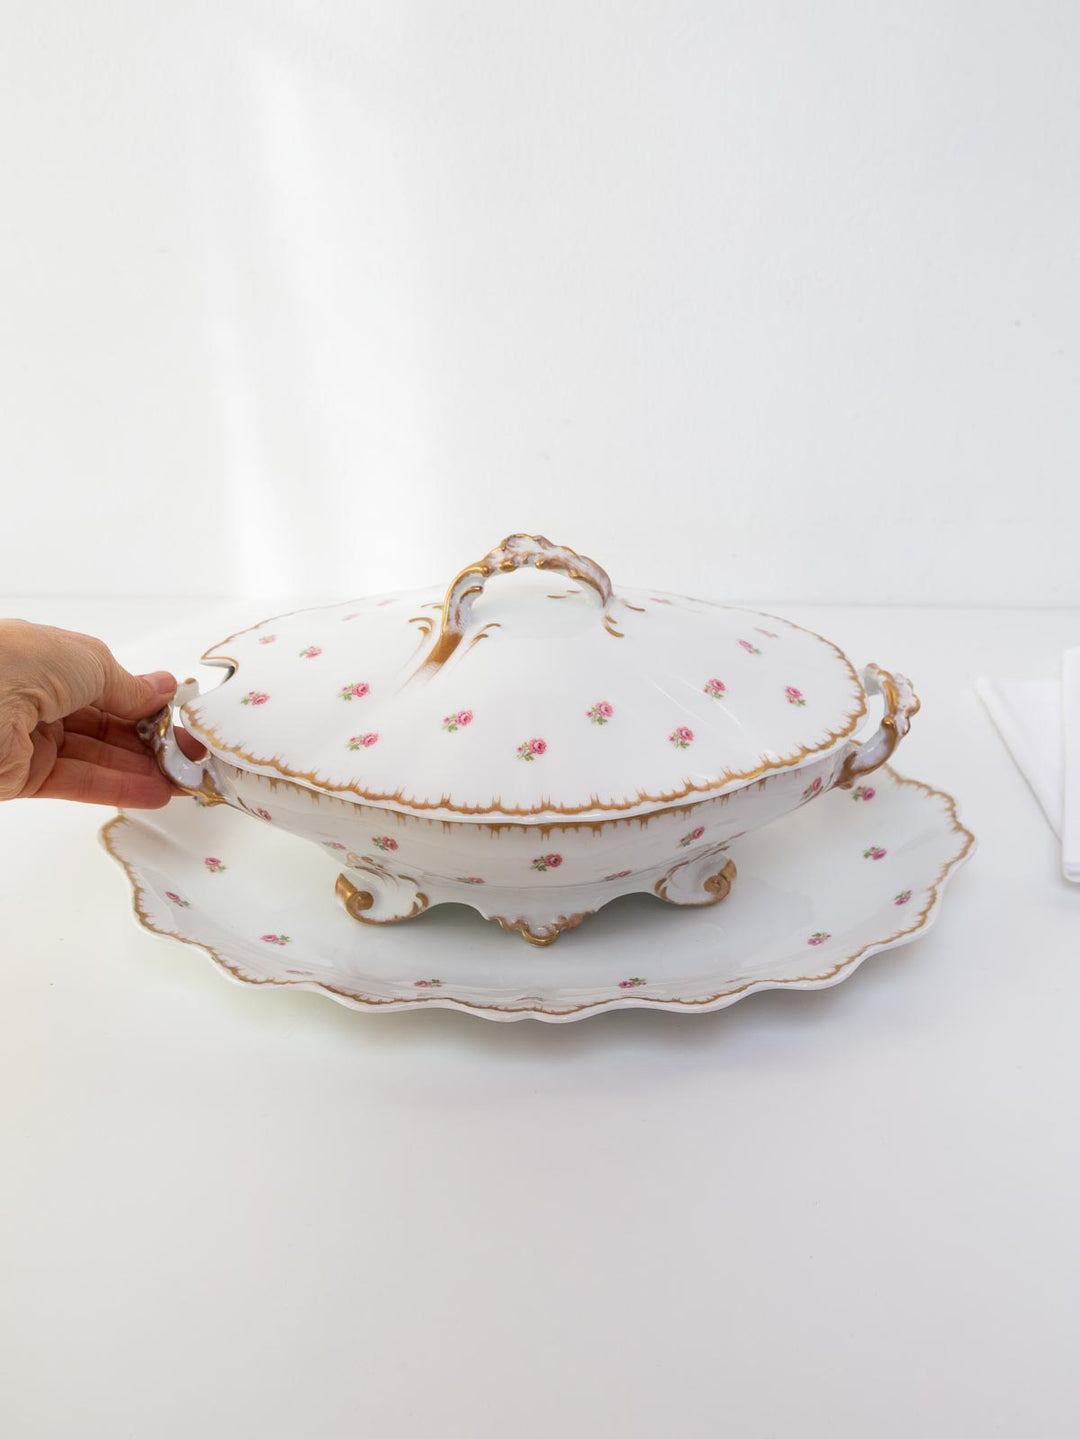 Gran sopera francesa Limoges florecillas con fuente large french tureen with plate